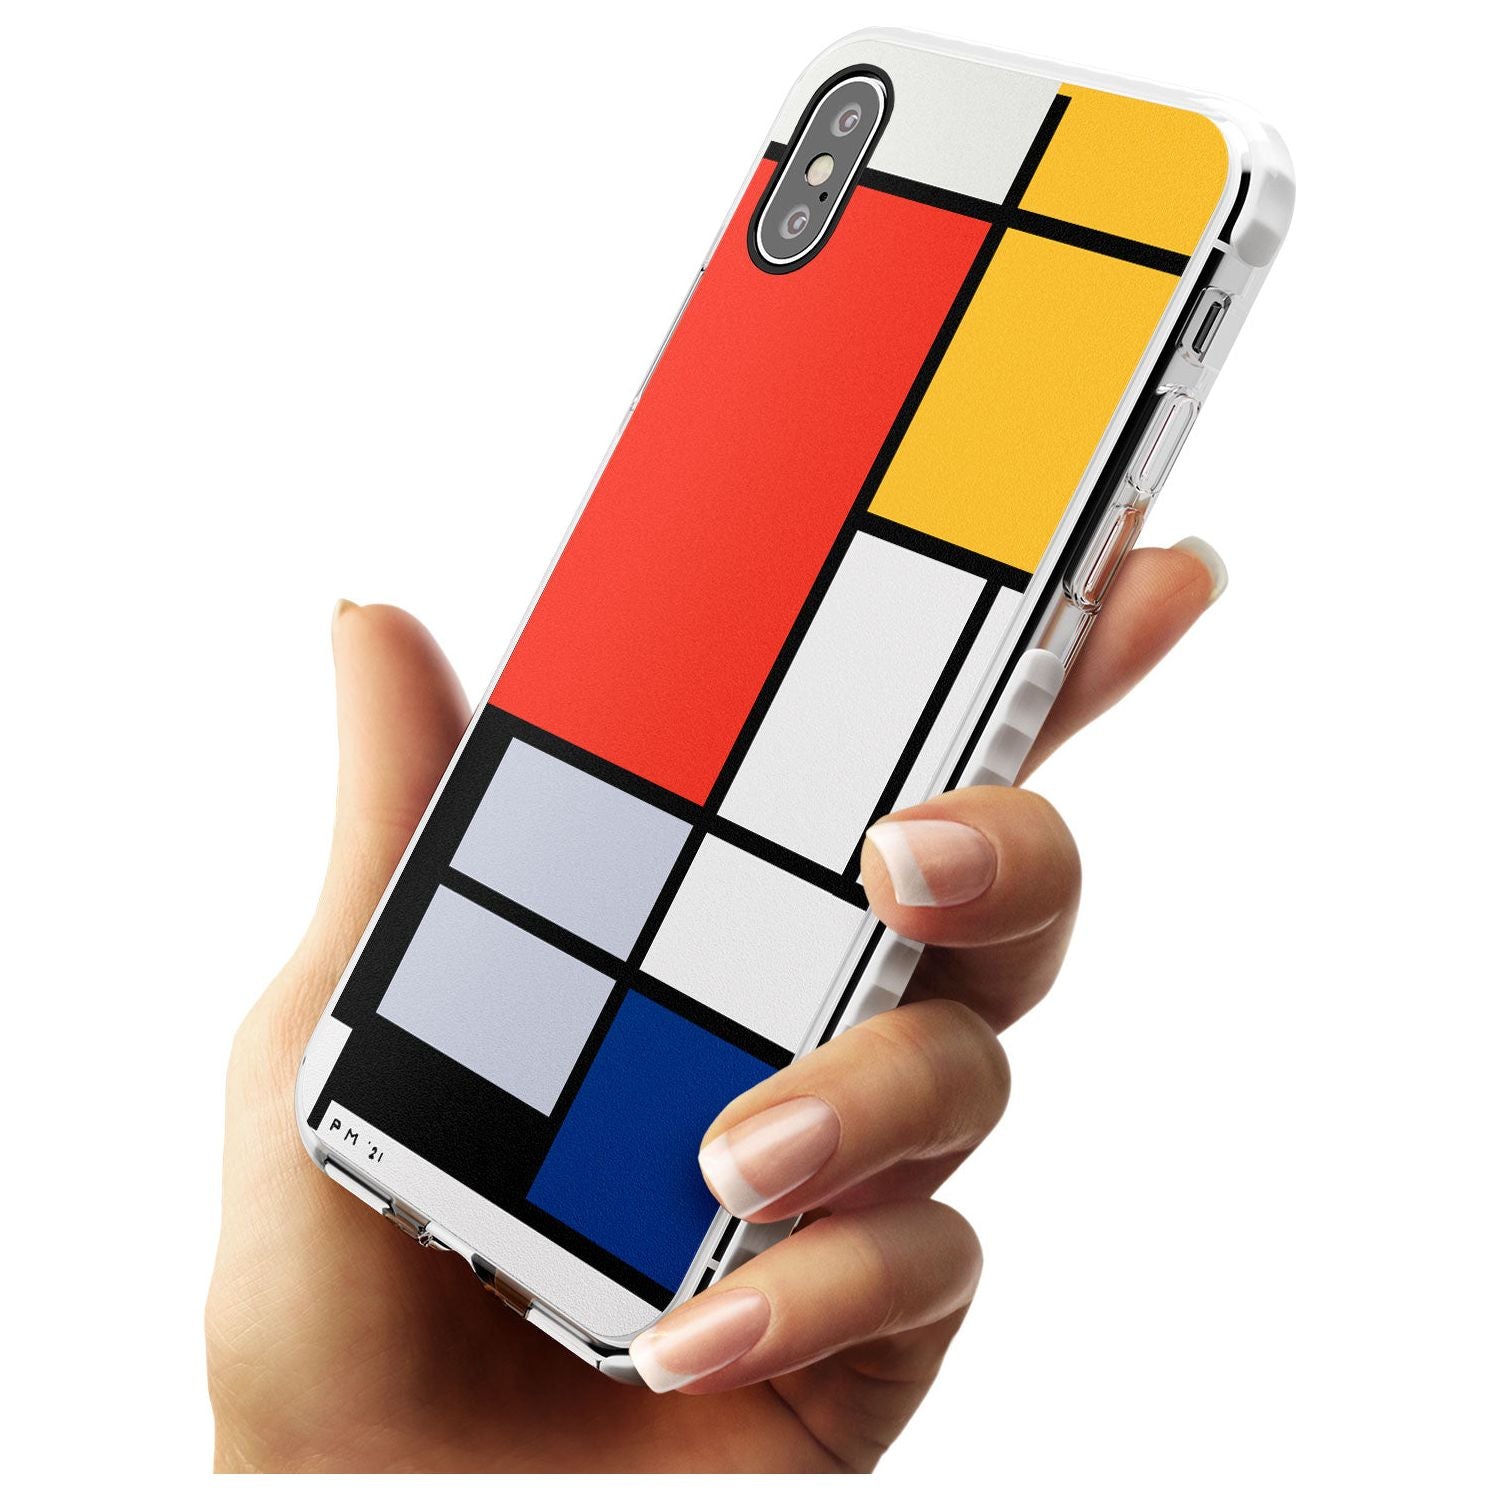 Piet Mondrian's Composition Impact Phone Case for iPhone X XS Max XR